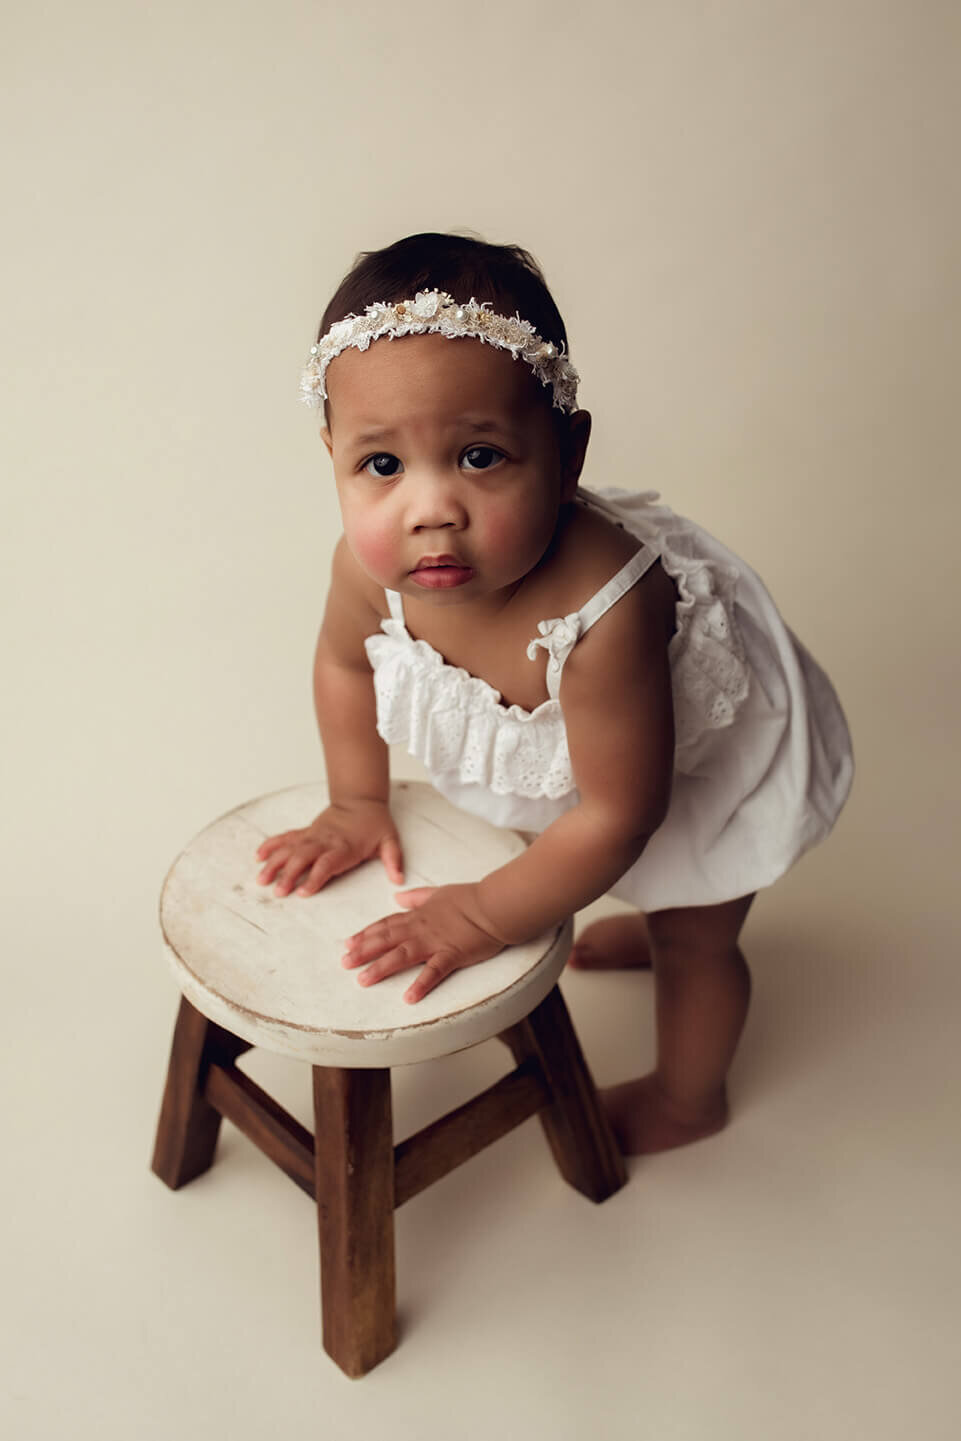 a one year old girl being very serious while holding onto a stool